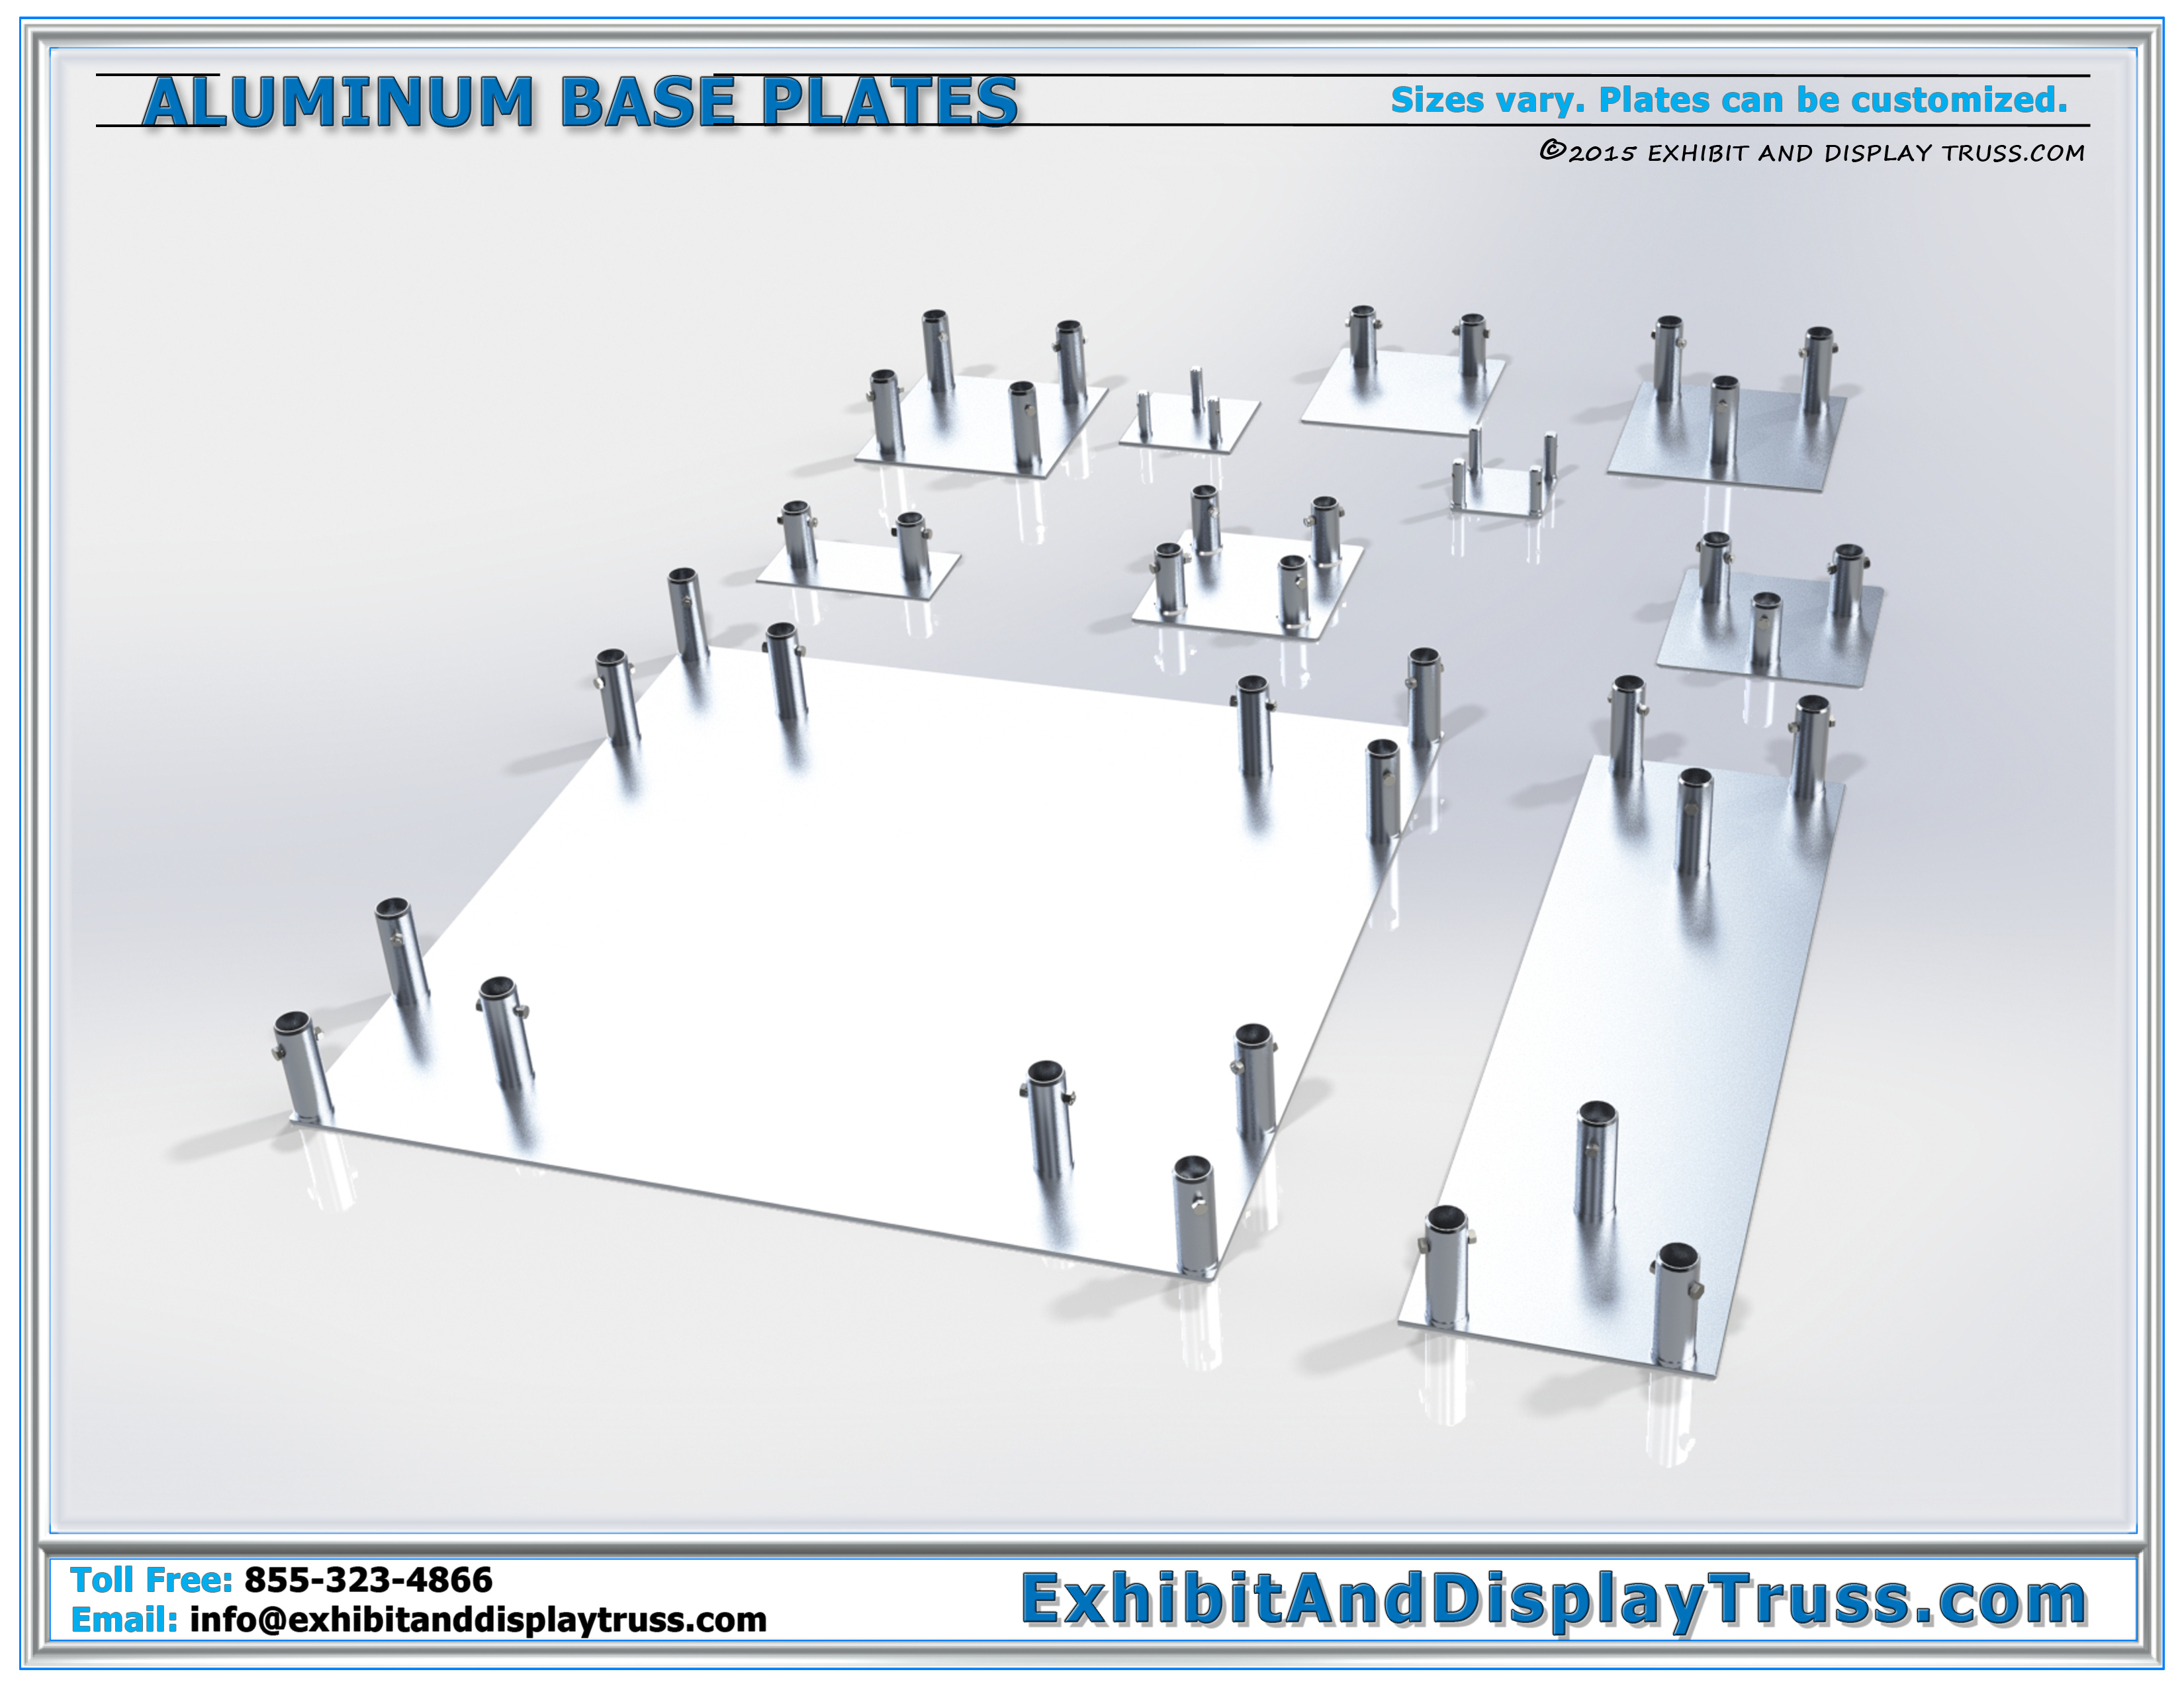 Aluminum Base Plates for Exhibition Exhibit Truss and Trussing Display Booths